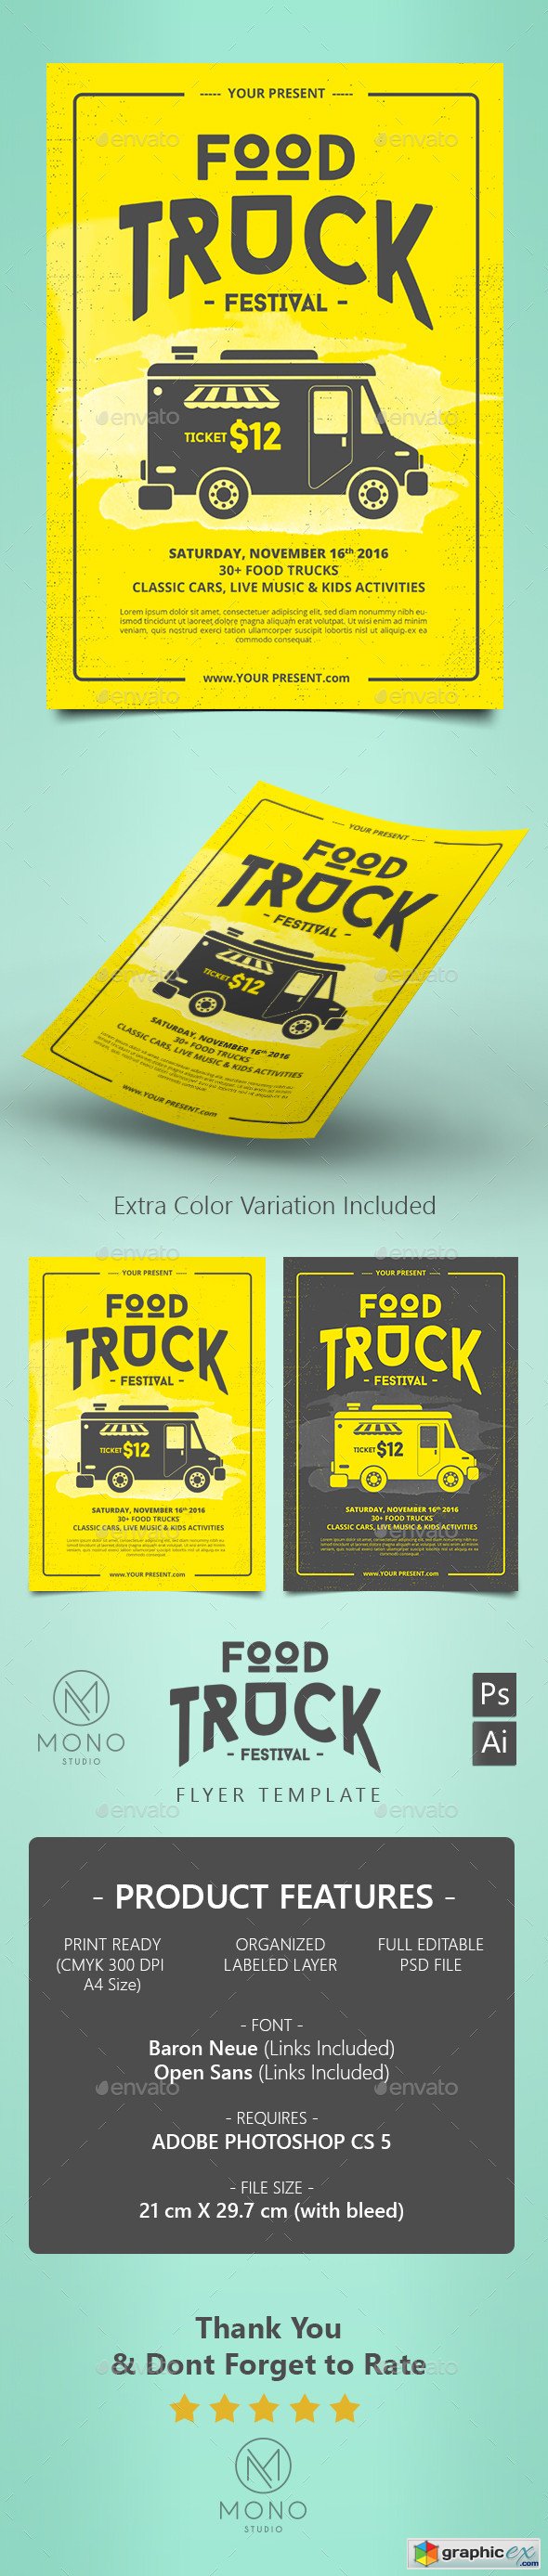 Food Truck Flyer / Poster 16216342